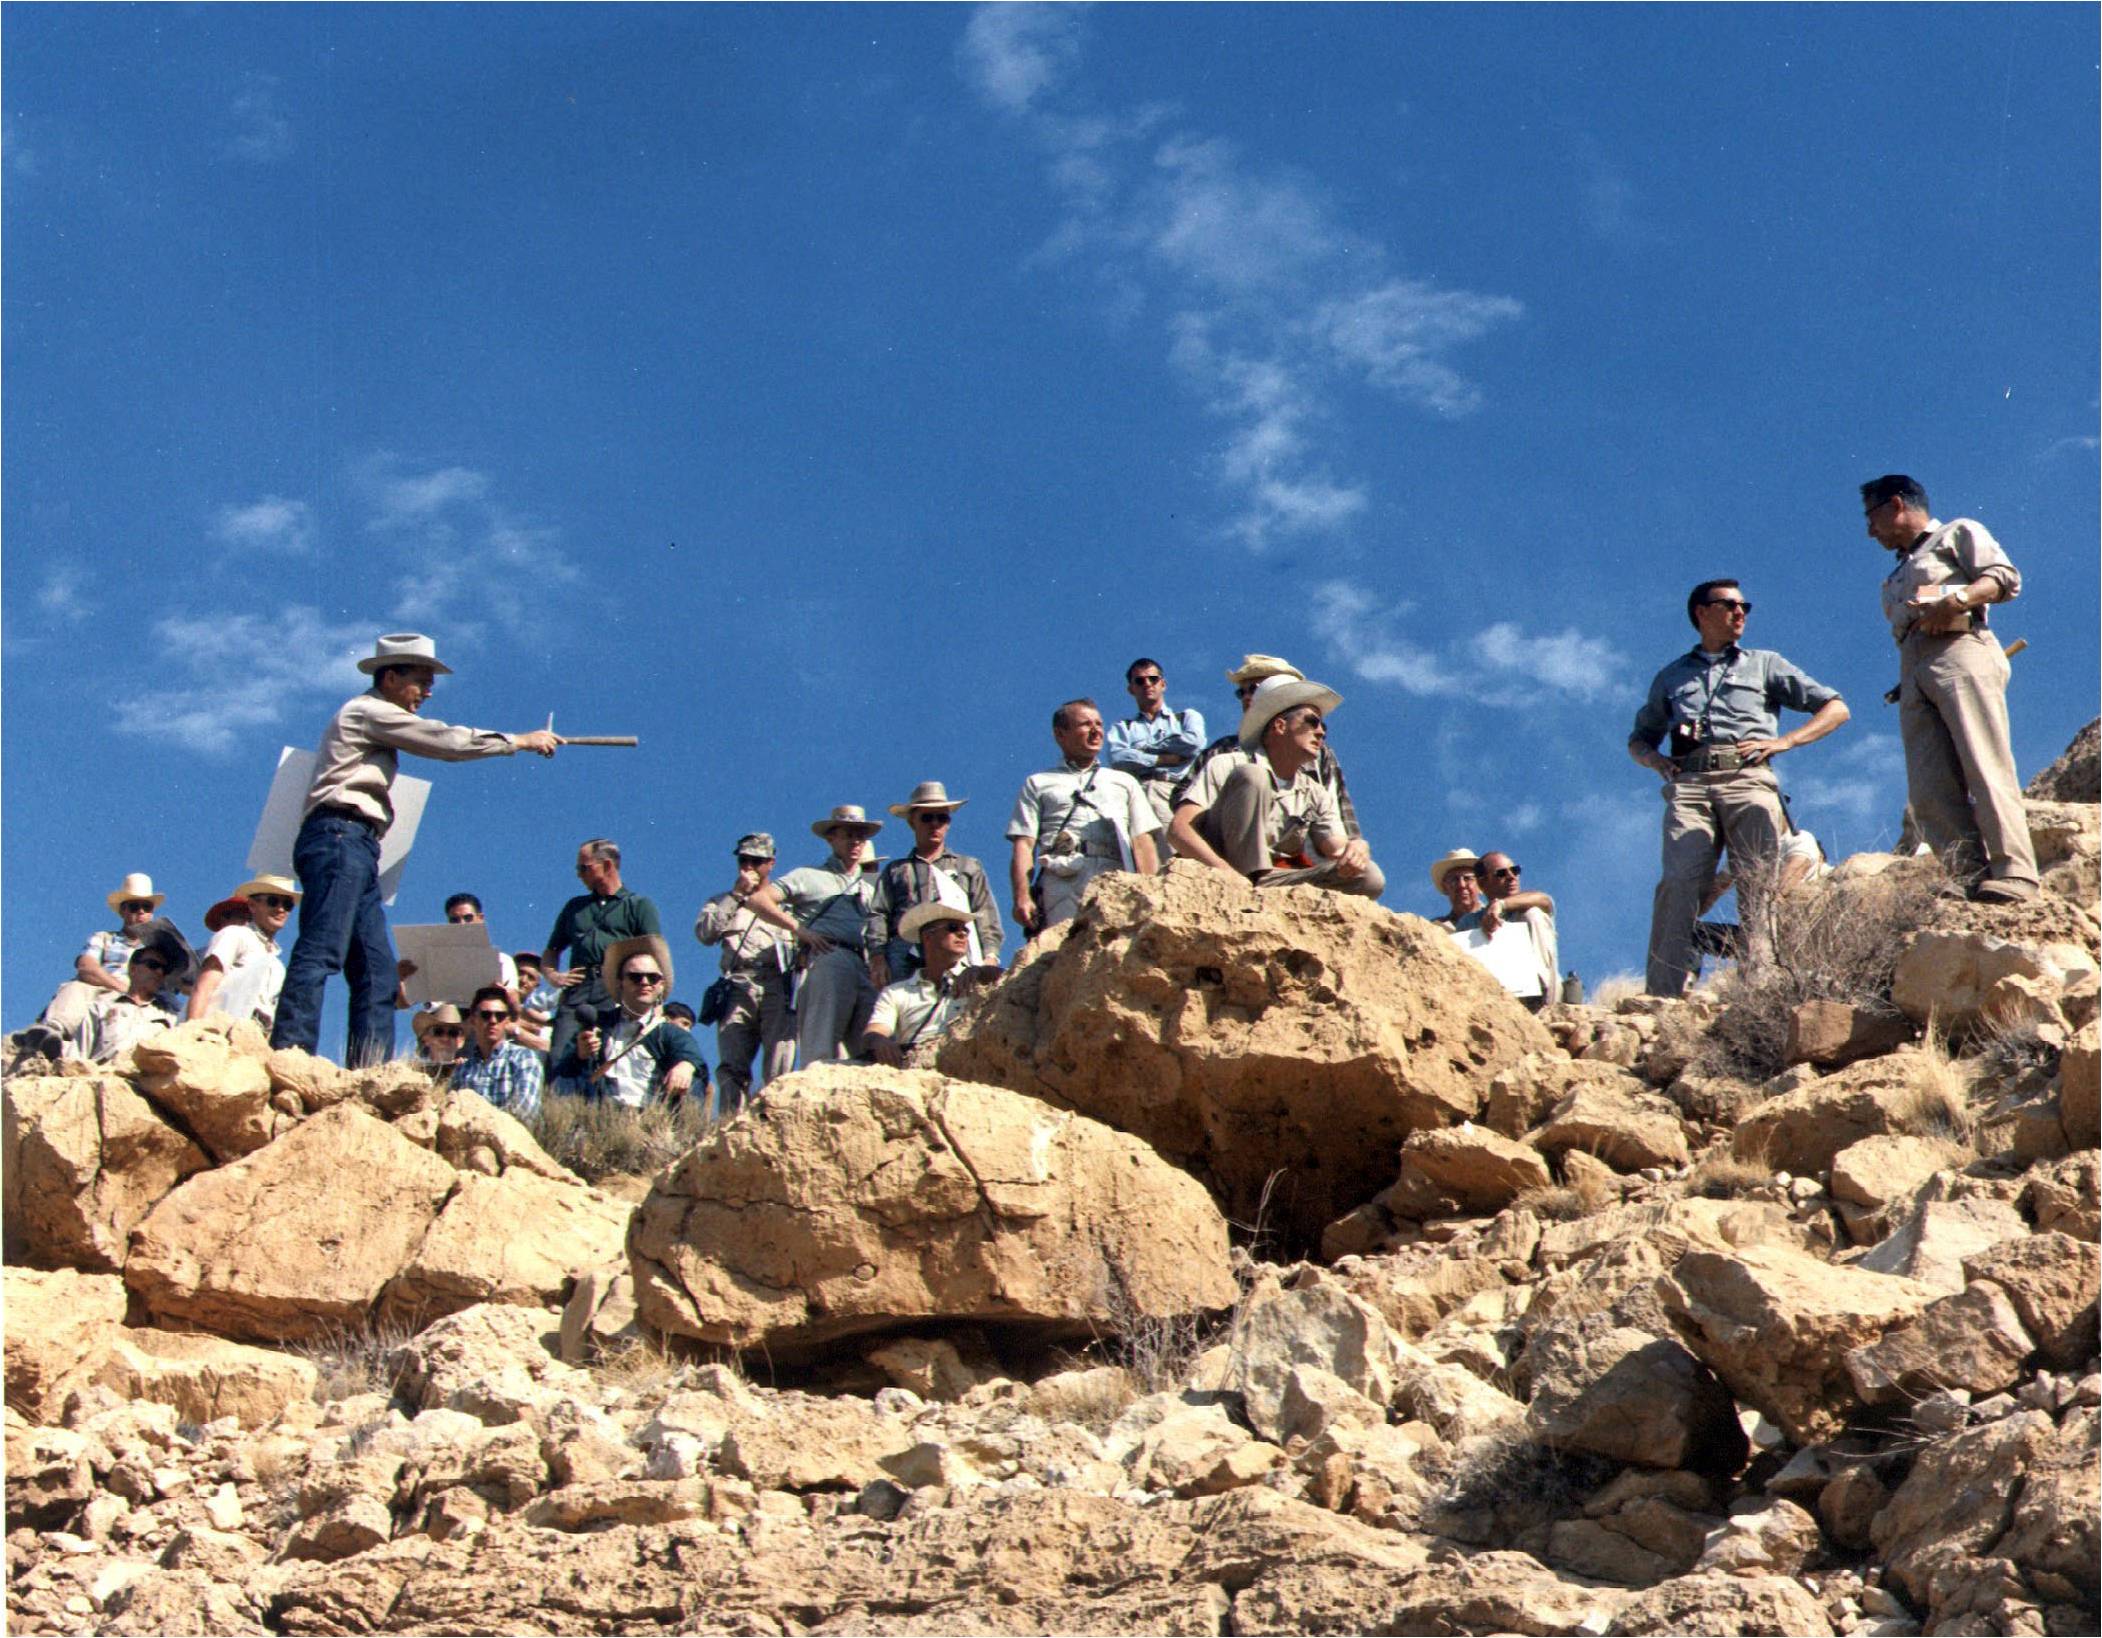 Astronomer Jane Shoemaker at Meteor Crater with Apollo astronauts during a field trip in May 1967.